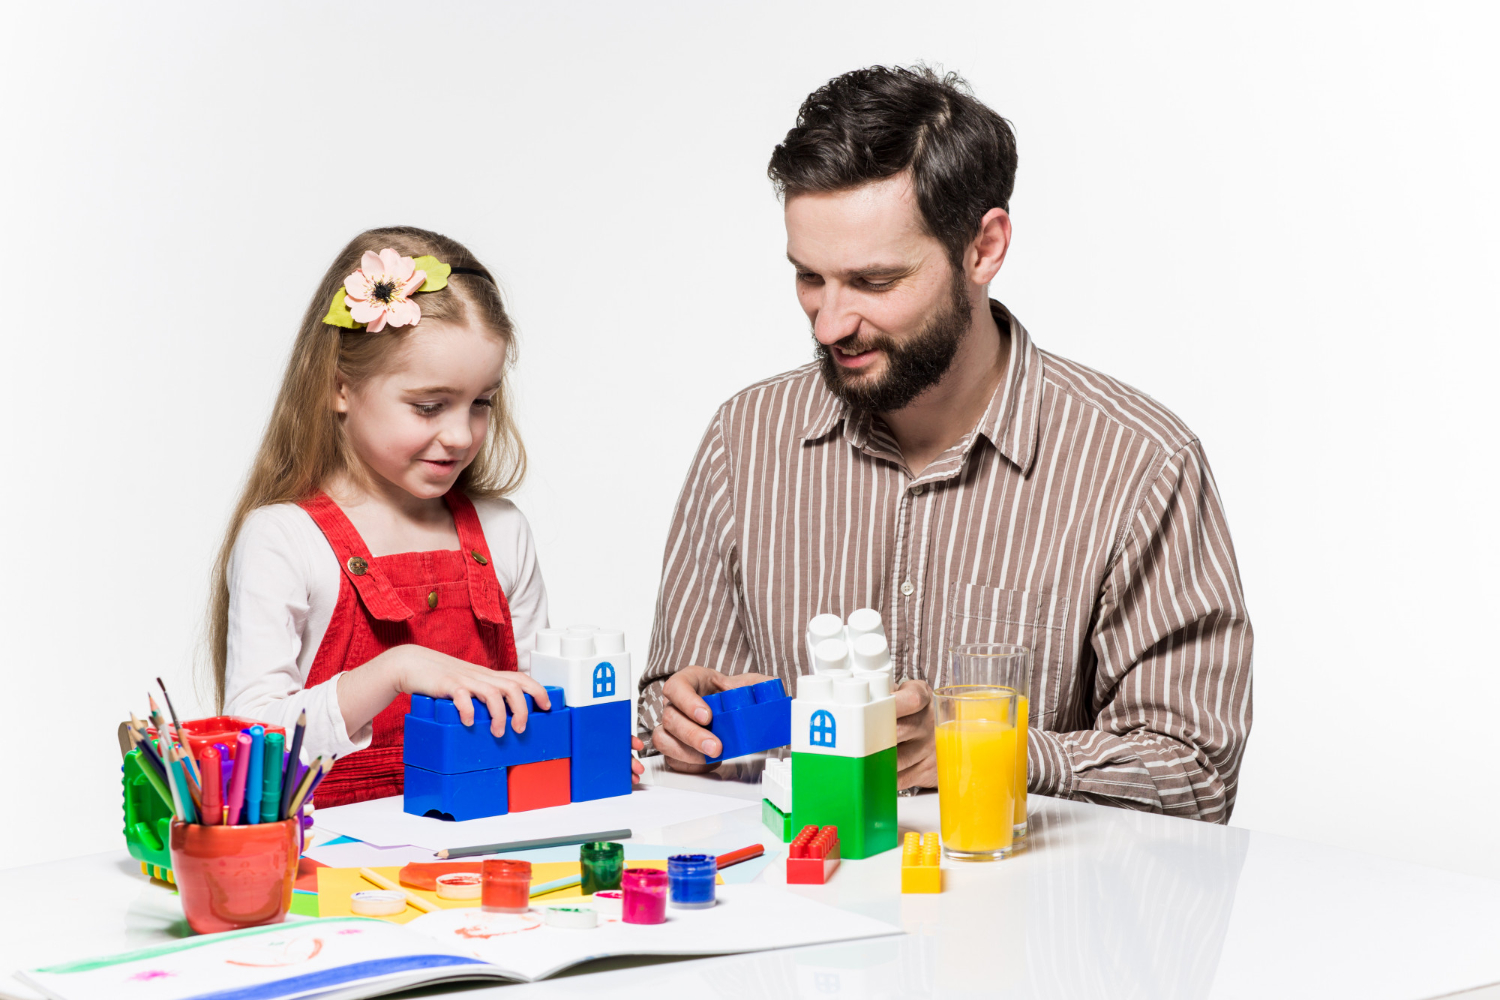 Limited studies on LEGO therapy suggest positive outcomes."